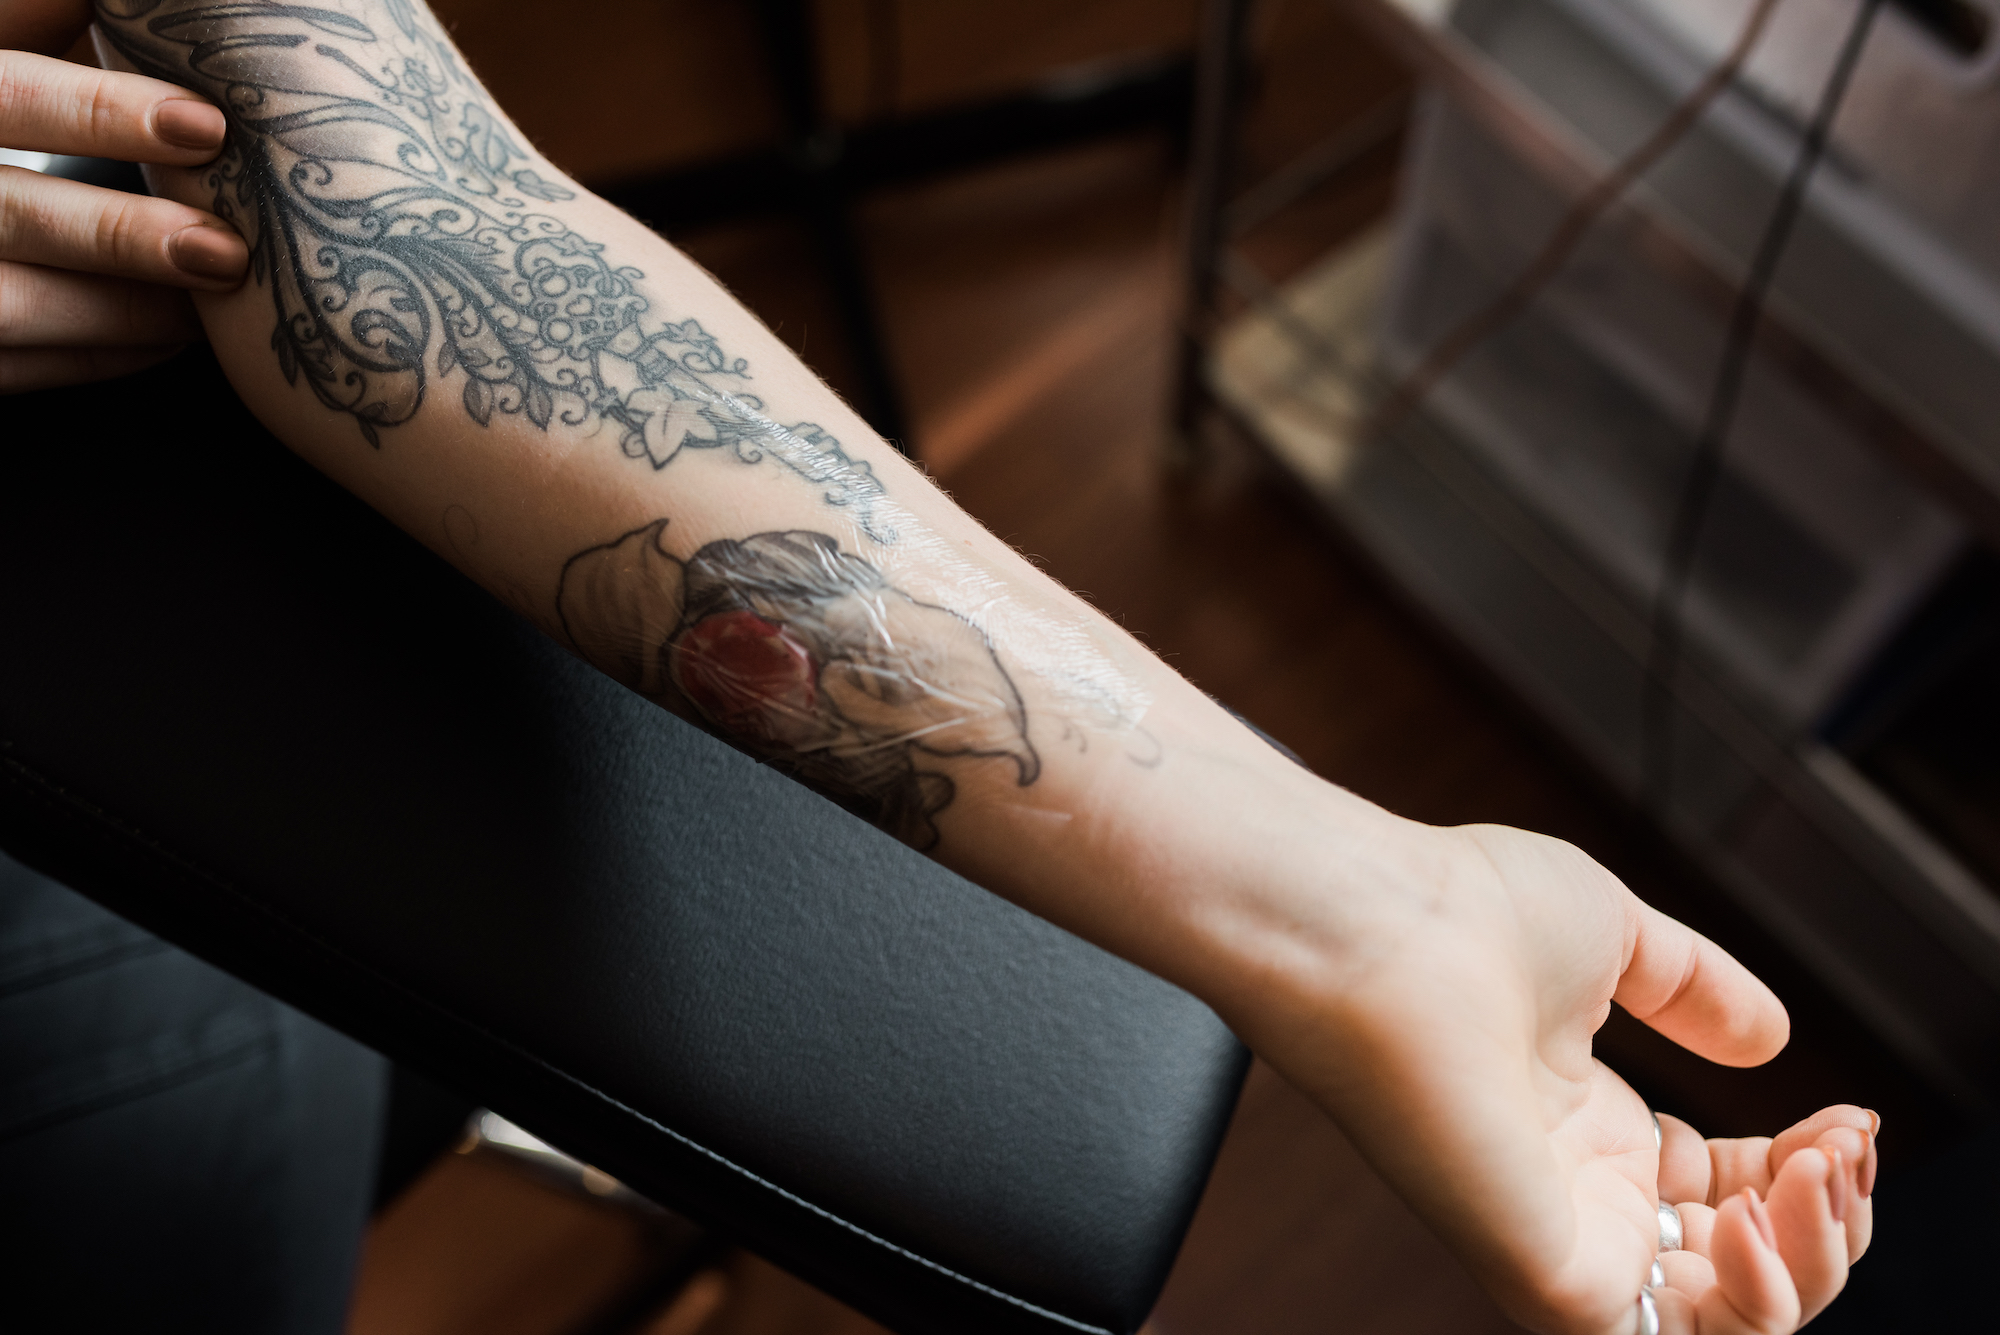 What To Expect By Day During The Tattoo After-Care Process